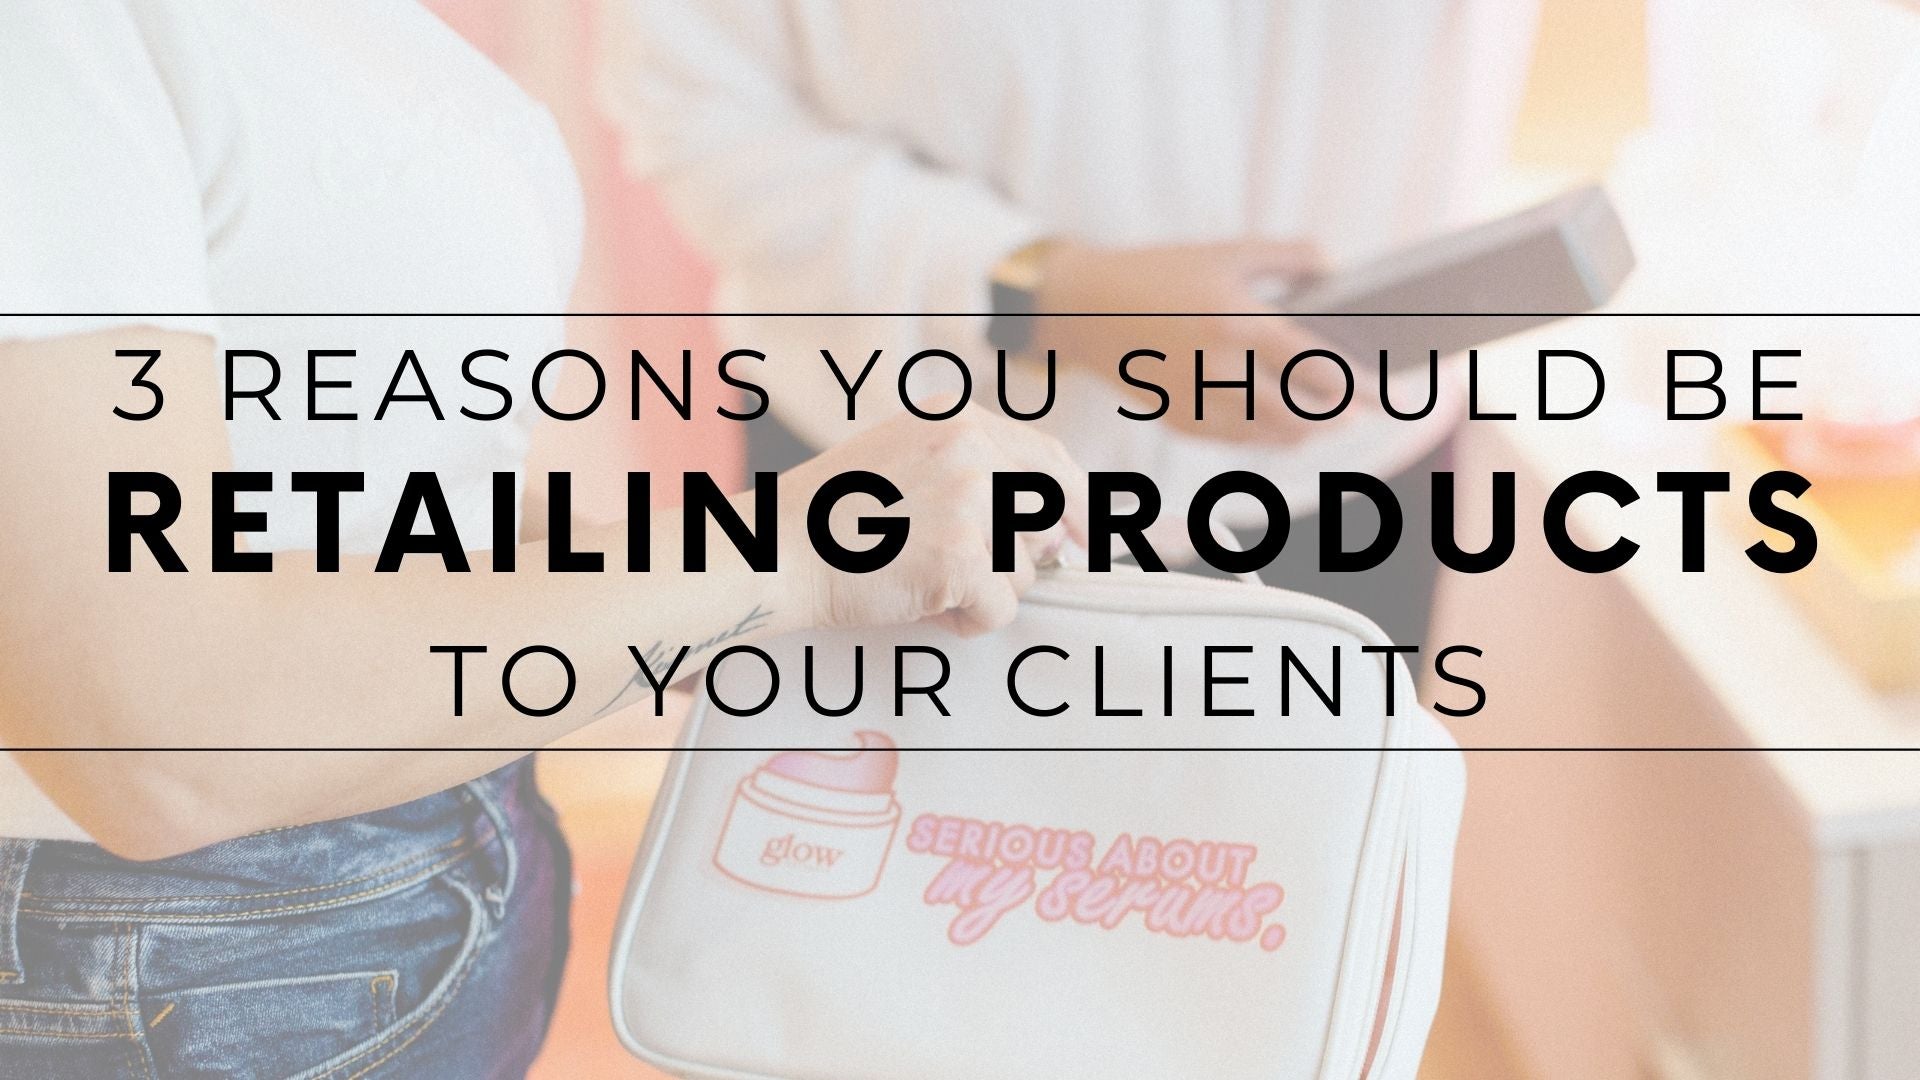 3 Reasons You Should Be Retailing Products to Your Clients